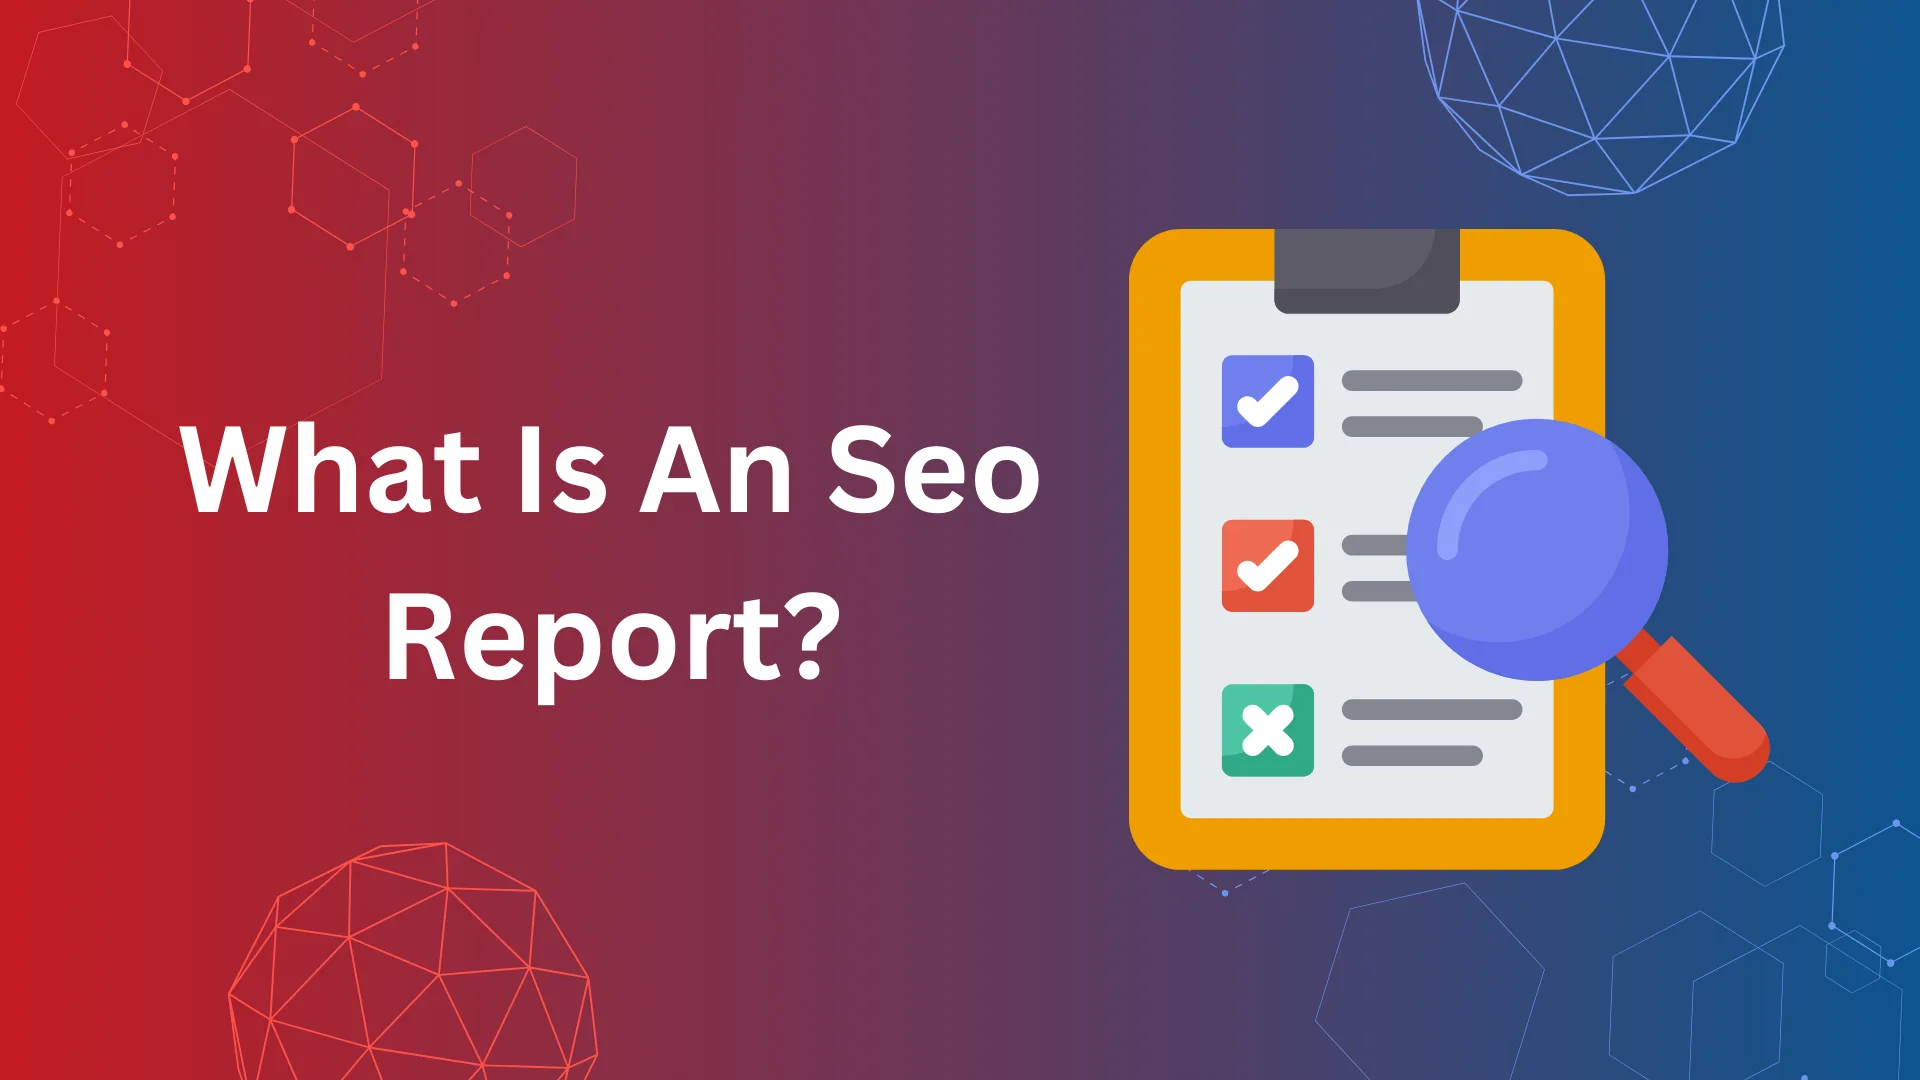 What Is An Seo Report?